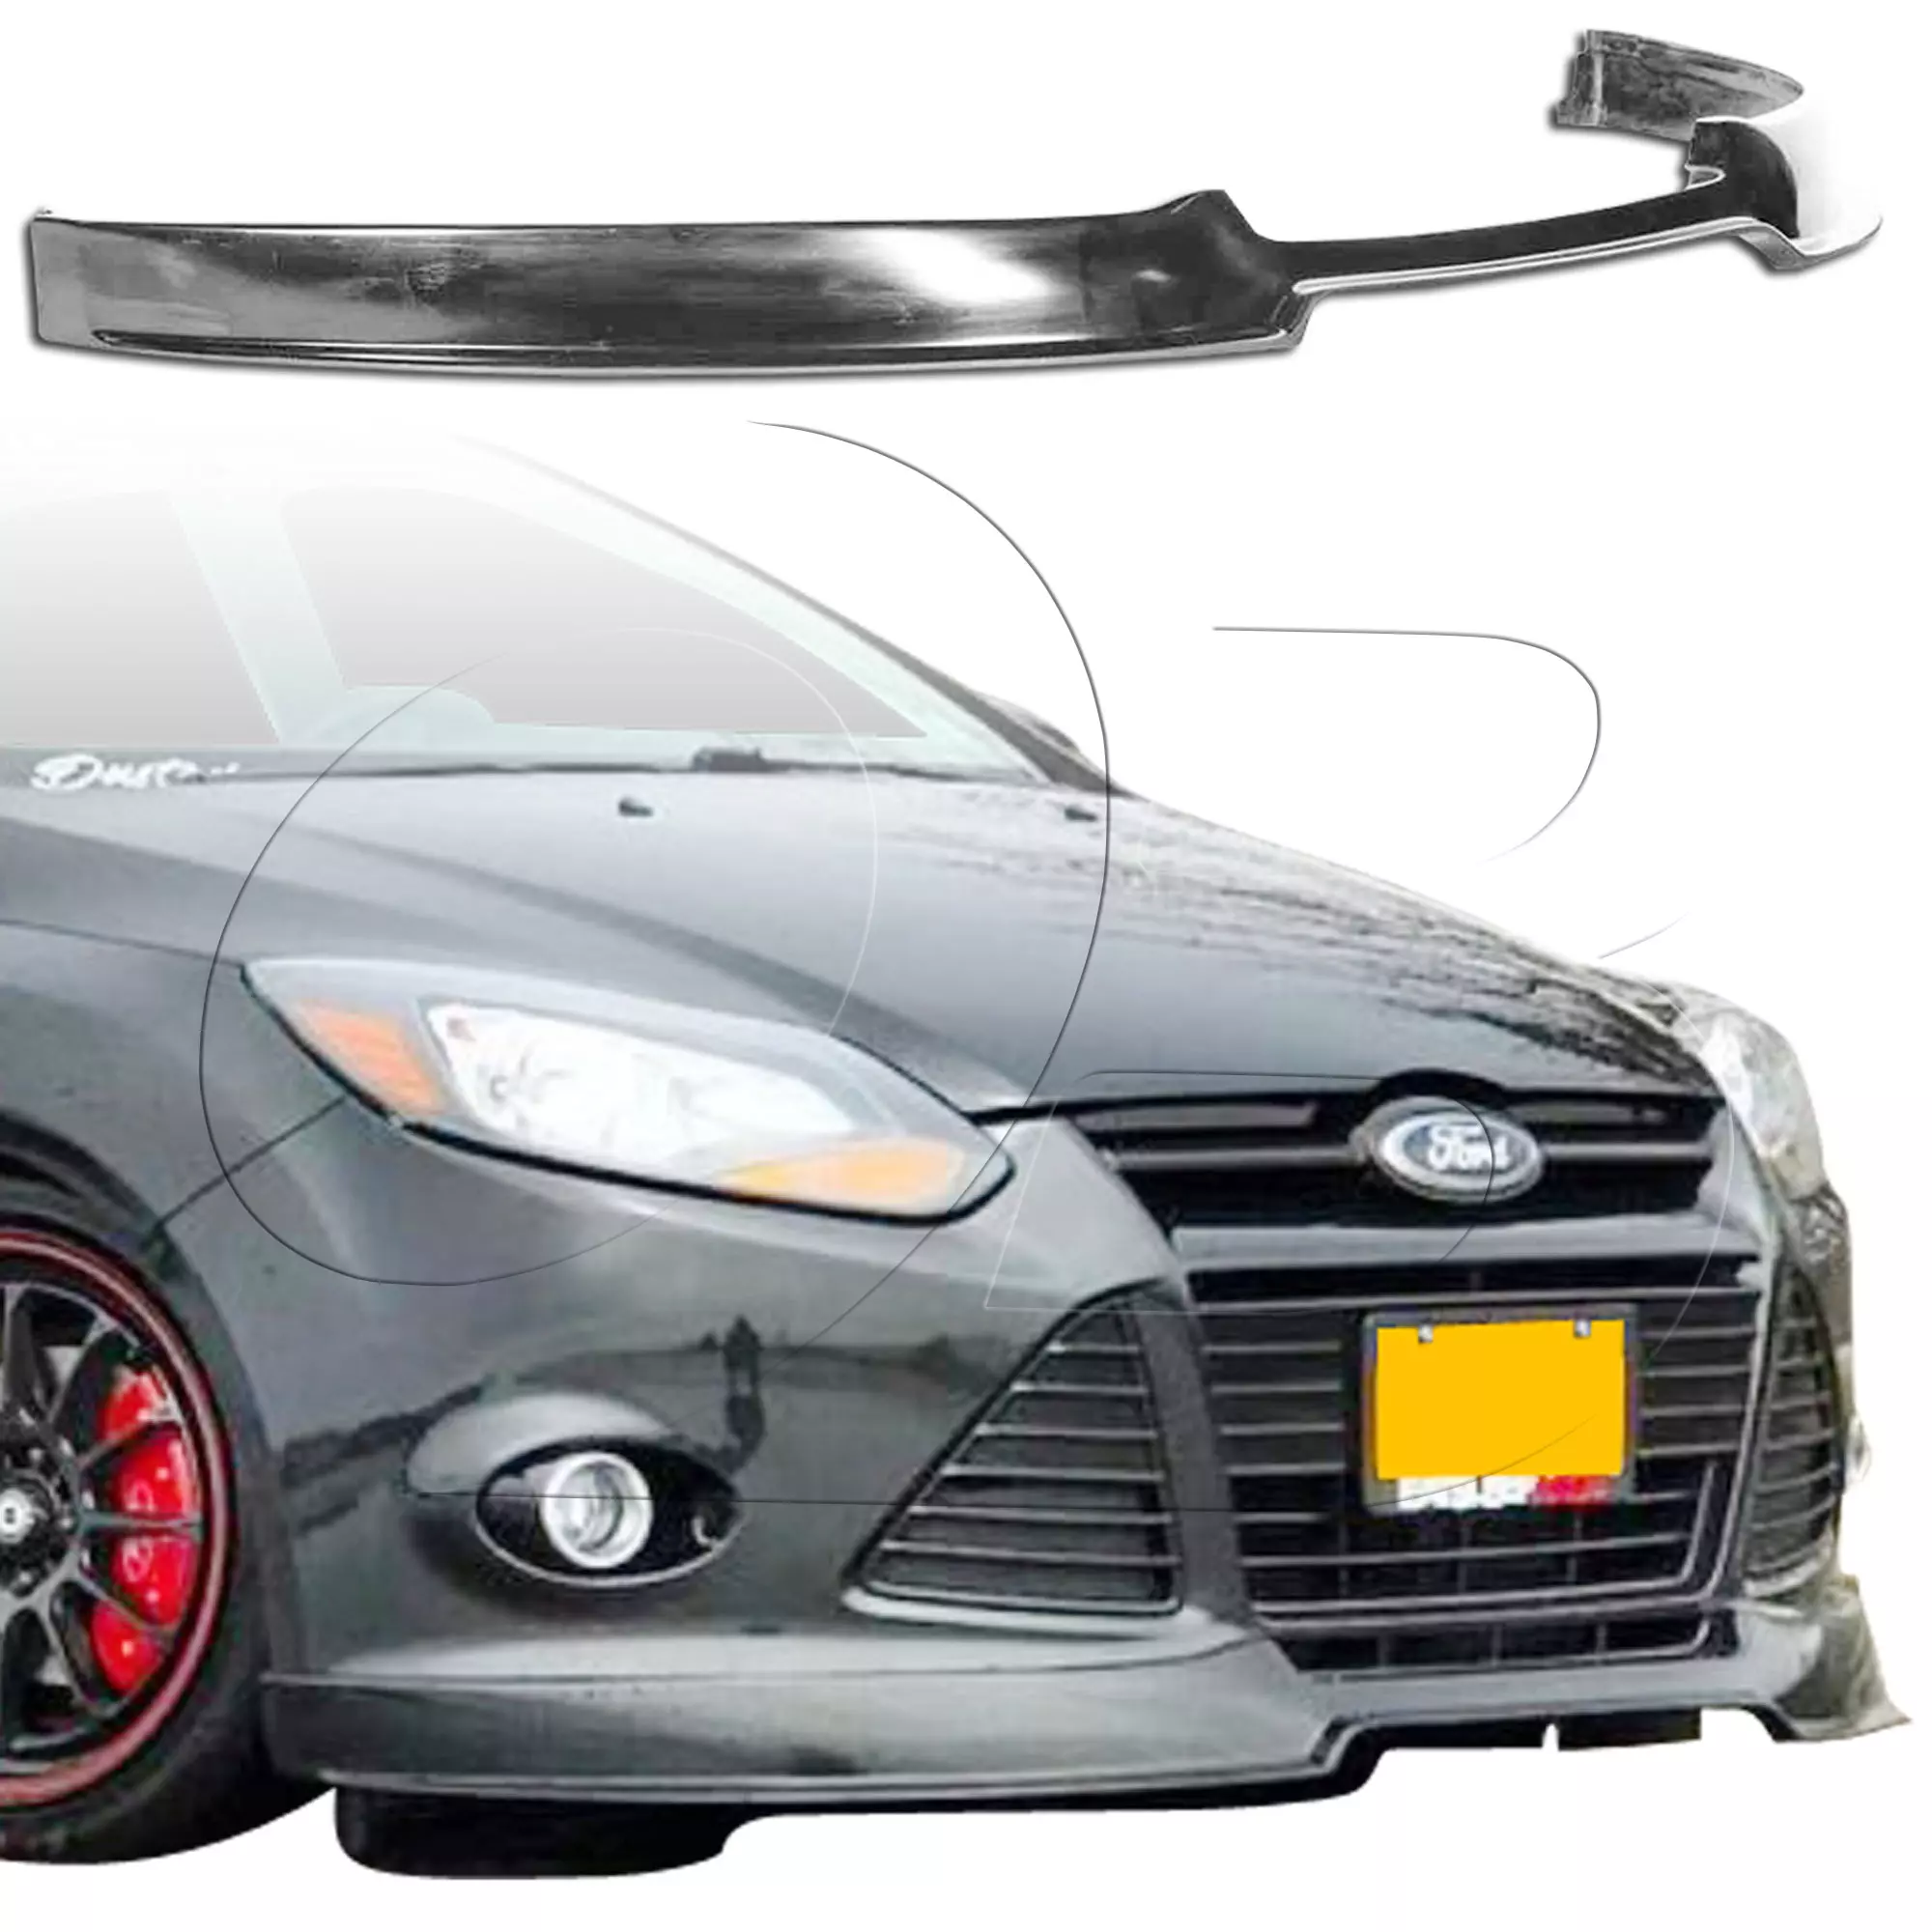 KBD Urethane BDS Style 1pc Front Lip > Ford Focus 2012-2014 - Image 3